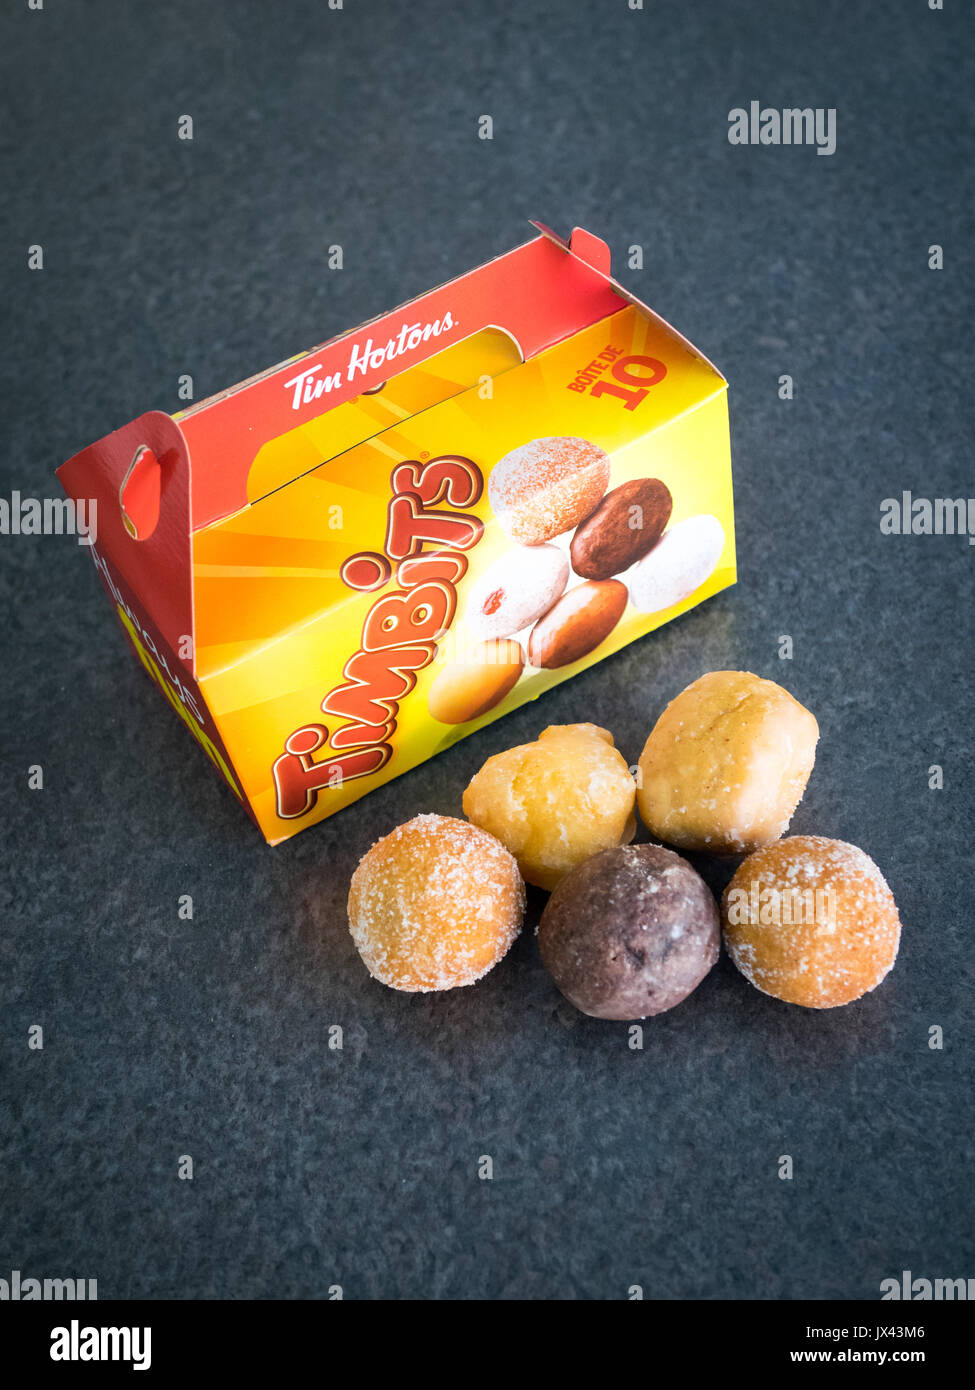 Timbits (donut holes, doughnut holes) from Tim Hortons, a popular Canadian fast food restaurant chain. Stock Photo